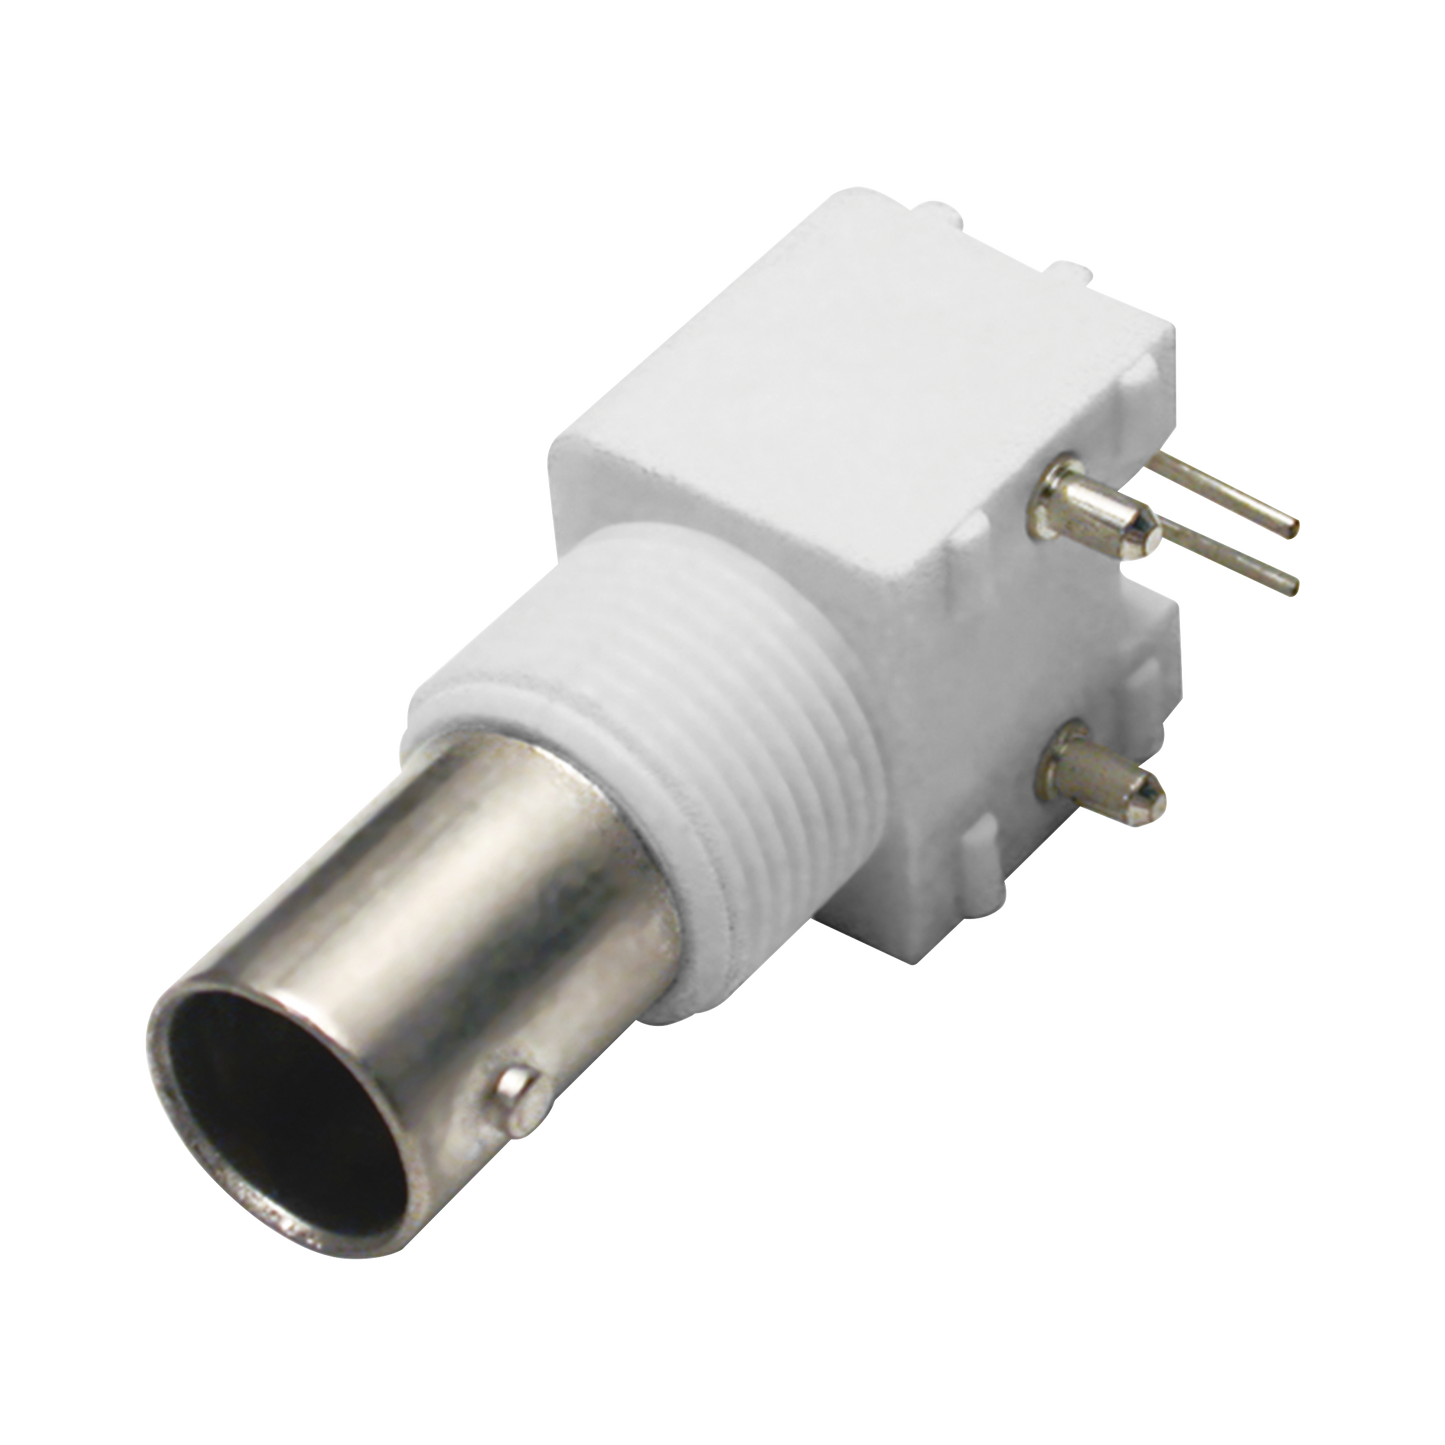 BNC Female Connector, Right Angle, PCB Mount with Posts, Legs, White Thermoplastic Body, Nickel/ Gold/ Polypropylene.